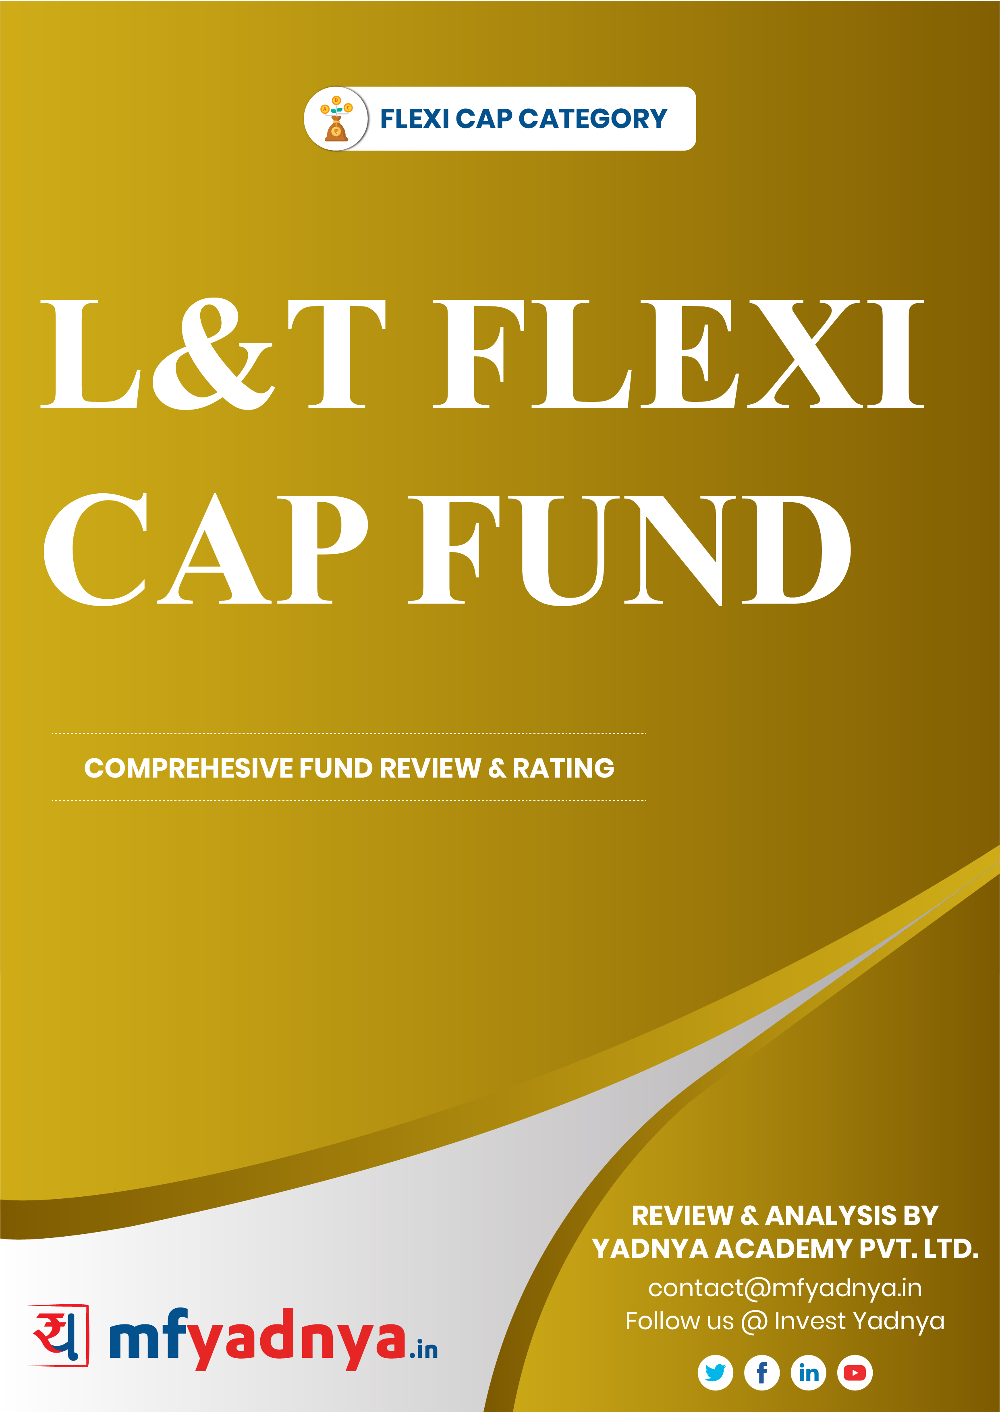 This e-book offers a comprehensive mutual fund review of L&T Equity Fund for multicap category. It reviews the fund's return, ratio, allocation etc. ✔ Detailed Mutual Fund Analysis ✔ Latest Research Reports